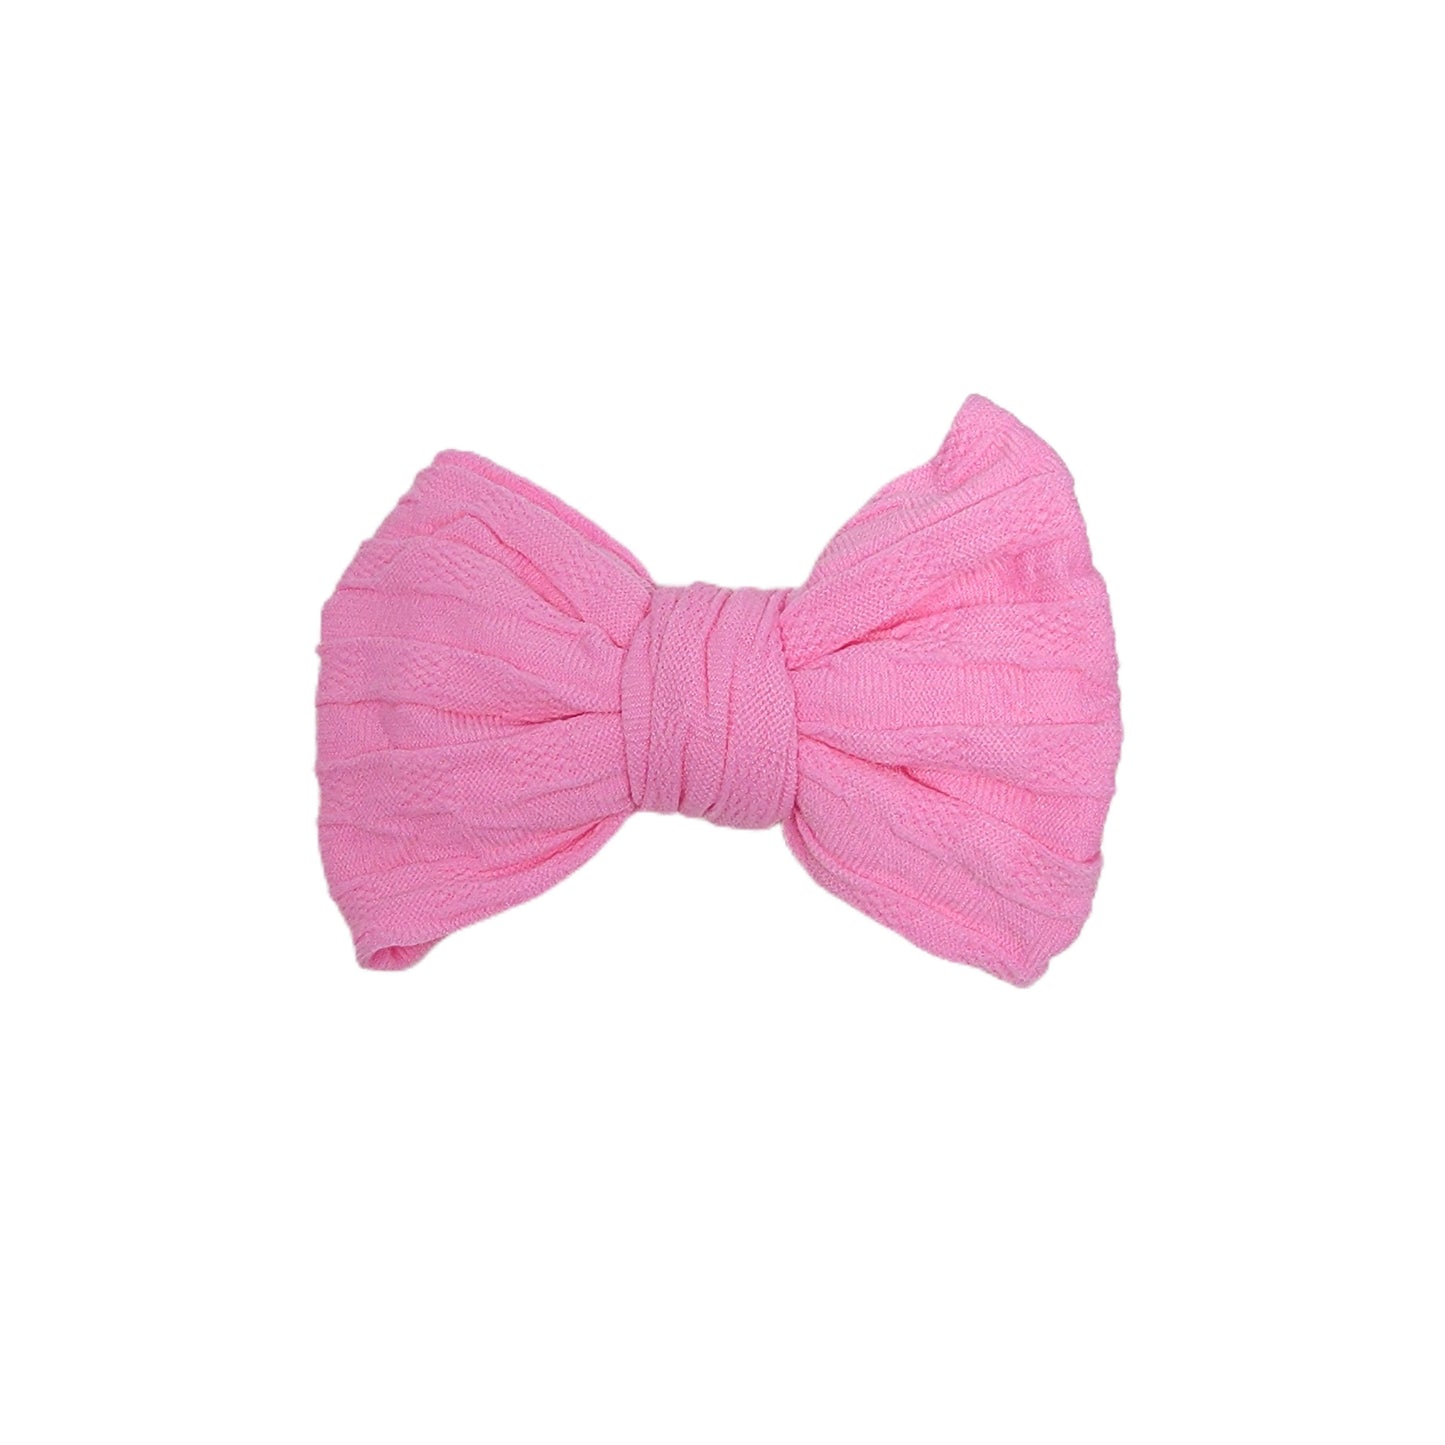 Pink Woven Knit Fabric Bow 4" 